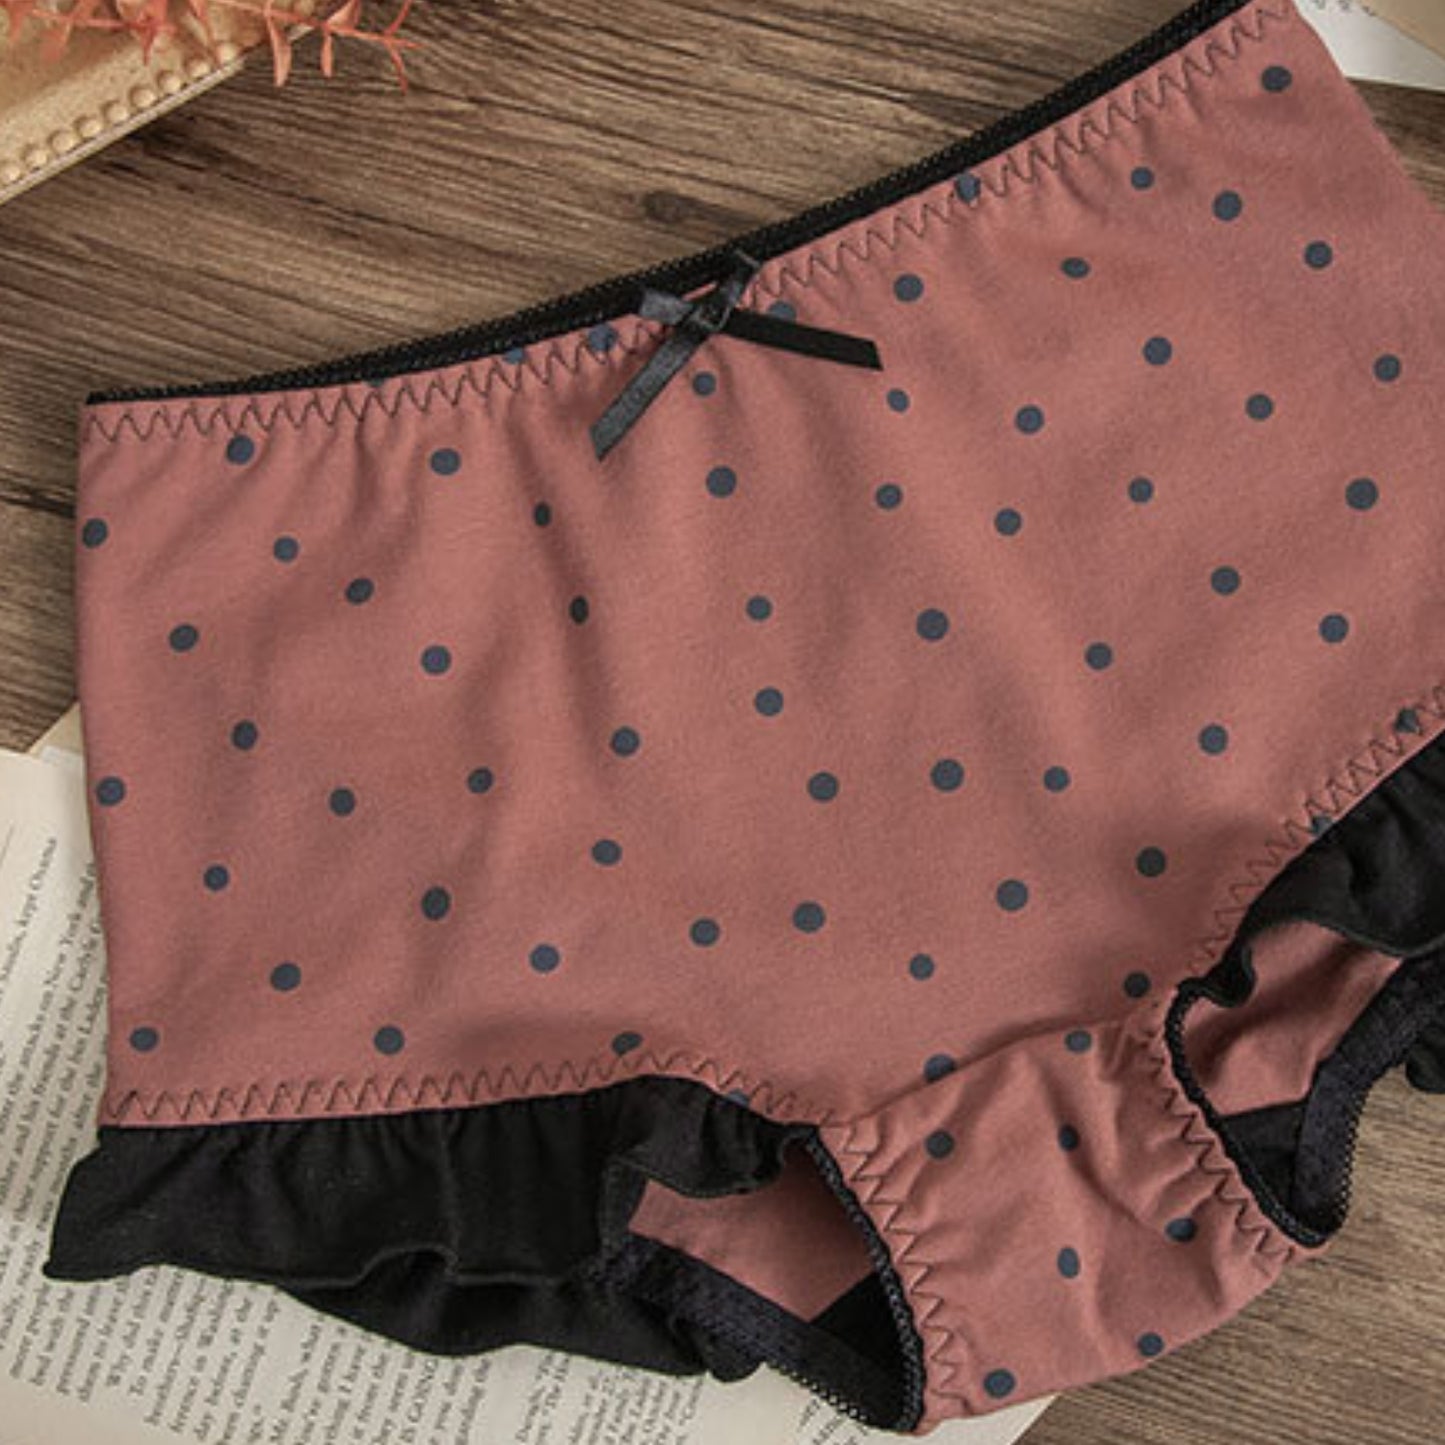 Women's 100% cotton panty briefs, Black polka dot underwear, Frilly cotton panties, Full coverage cotton briefs, White cotton underwear, Olive cotton panty, Mauve cotton briefs, Polka dot and frills design, Comfortable full coverage panties, Stylish cotton underwear.